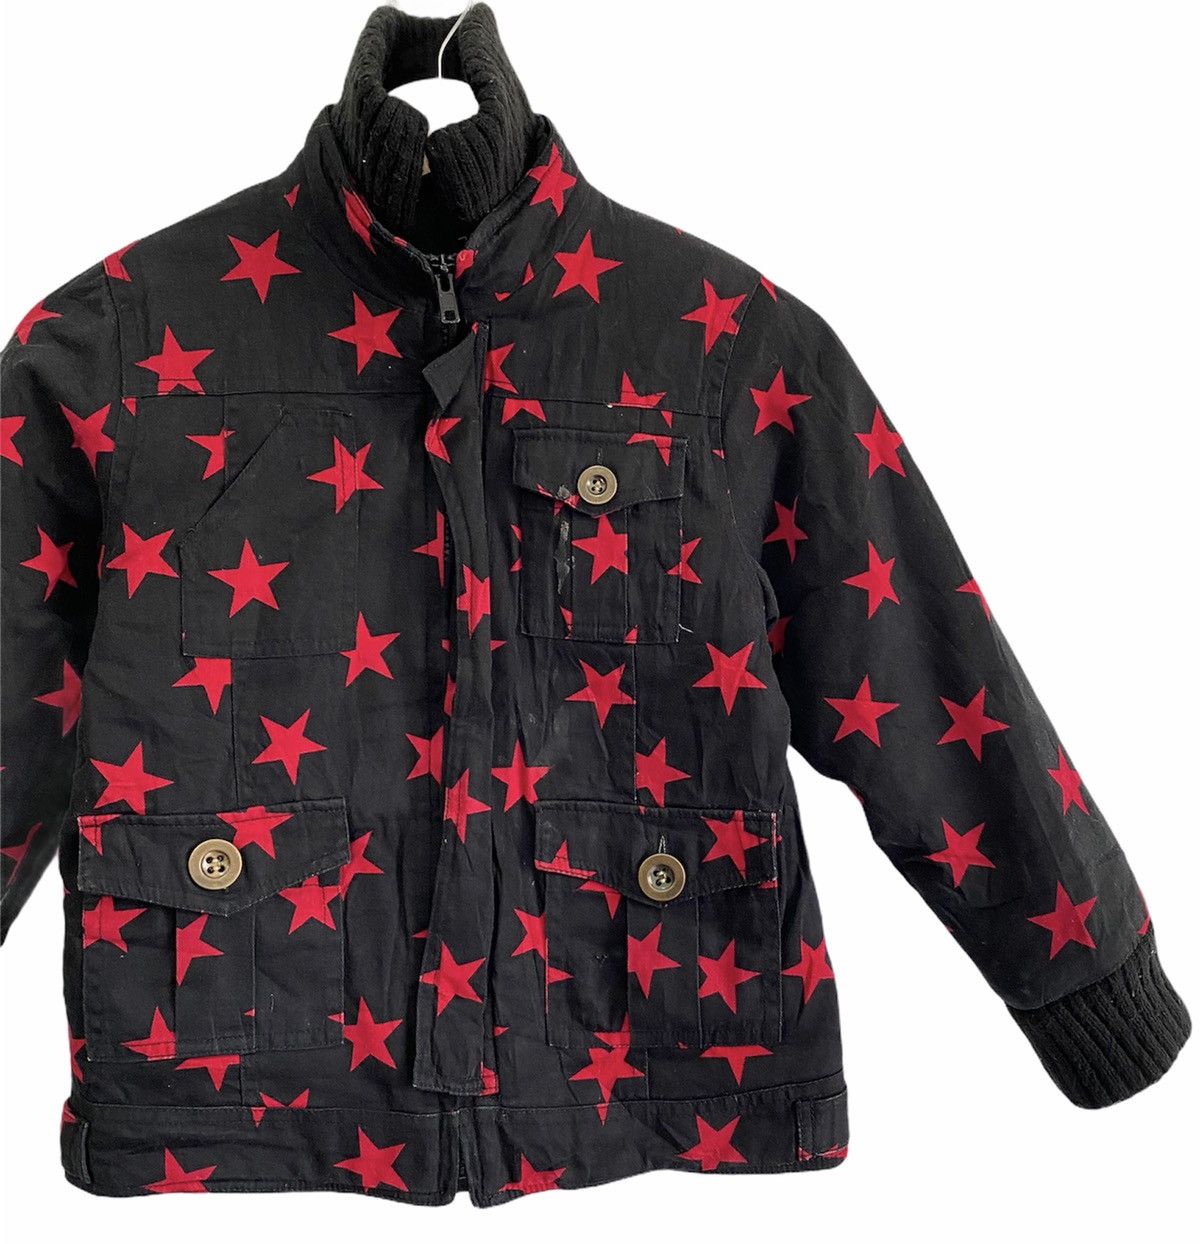 Vintage Military Star Hysteric Glamour Style M65 Kid Jacket - 2